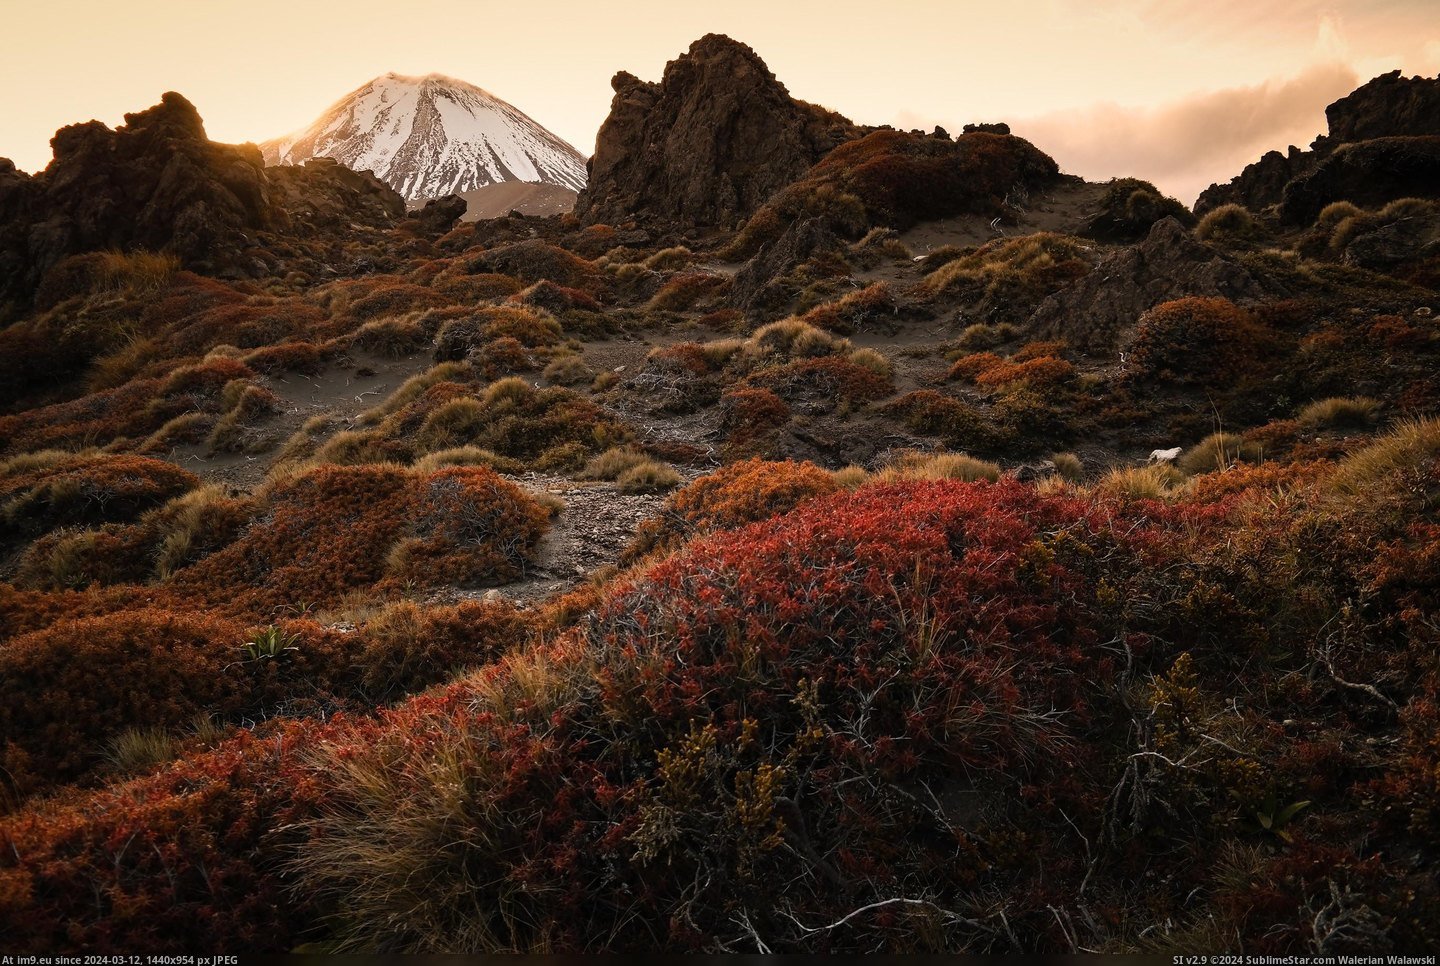 #Sun #Mount #Track #Dipping #Tongariro #Zealand #Northern [Earthporn] Probably need more New Zealand here. The sun dipping behind Mount Ngauruhoe from Oturere track, Tongariro Northern C Pic. (Image of album My r/EARTHPORN favs))